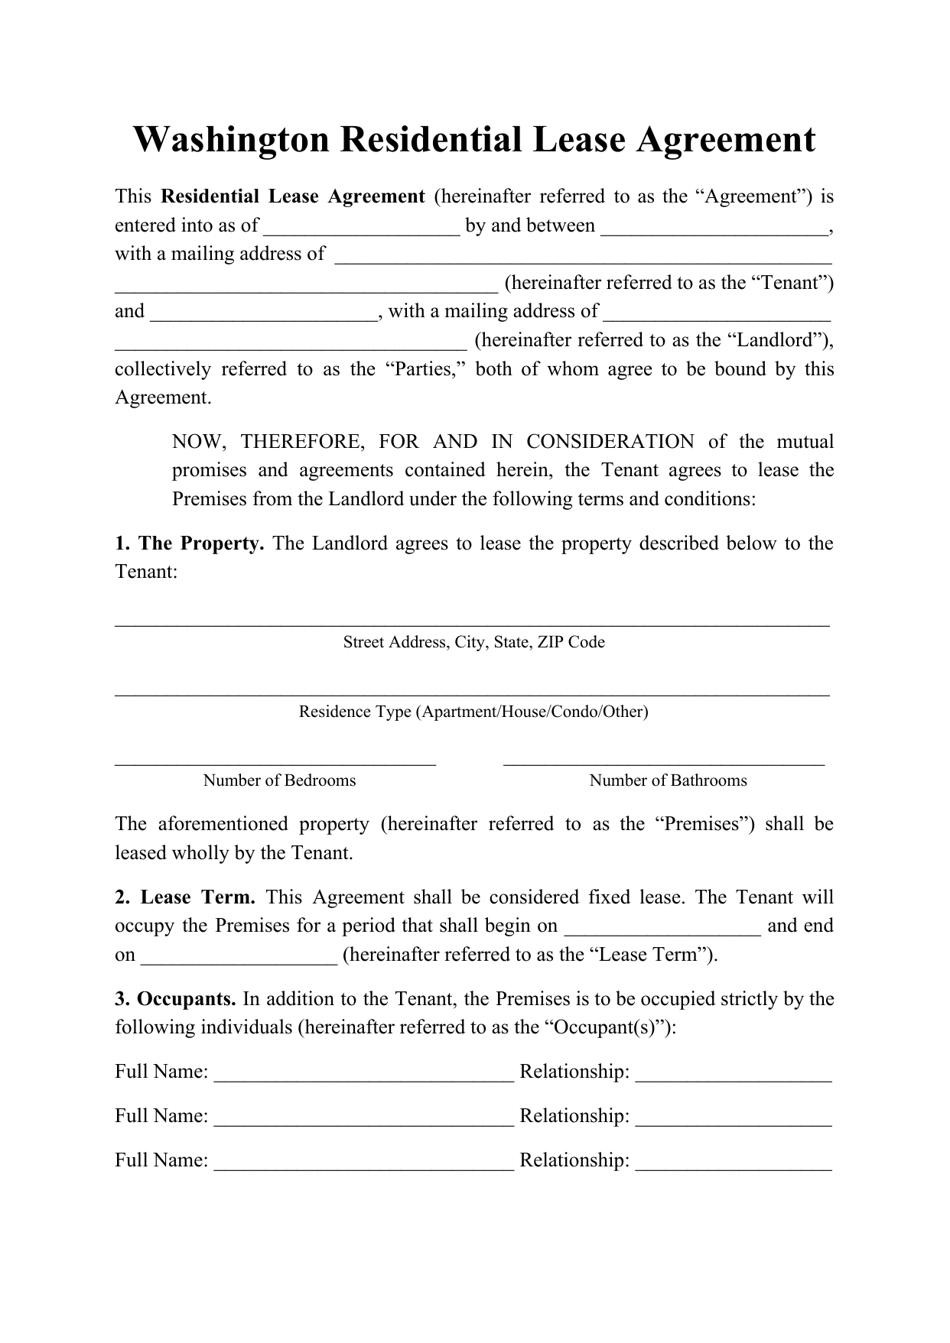 Washington Residential Lease Agreement Template Fill Out Sign Online